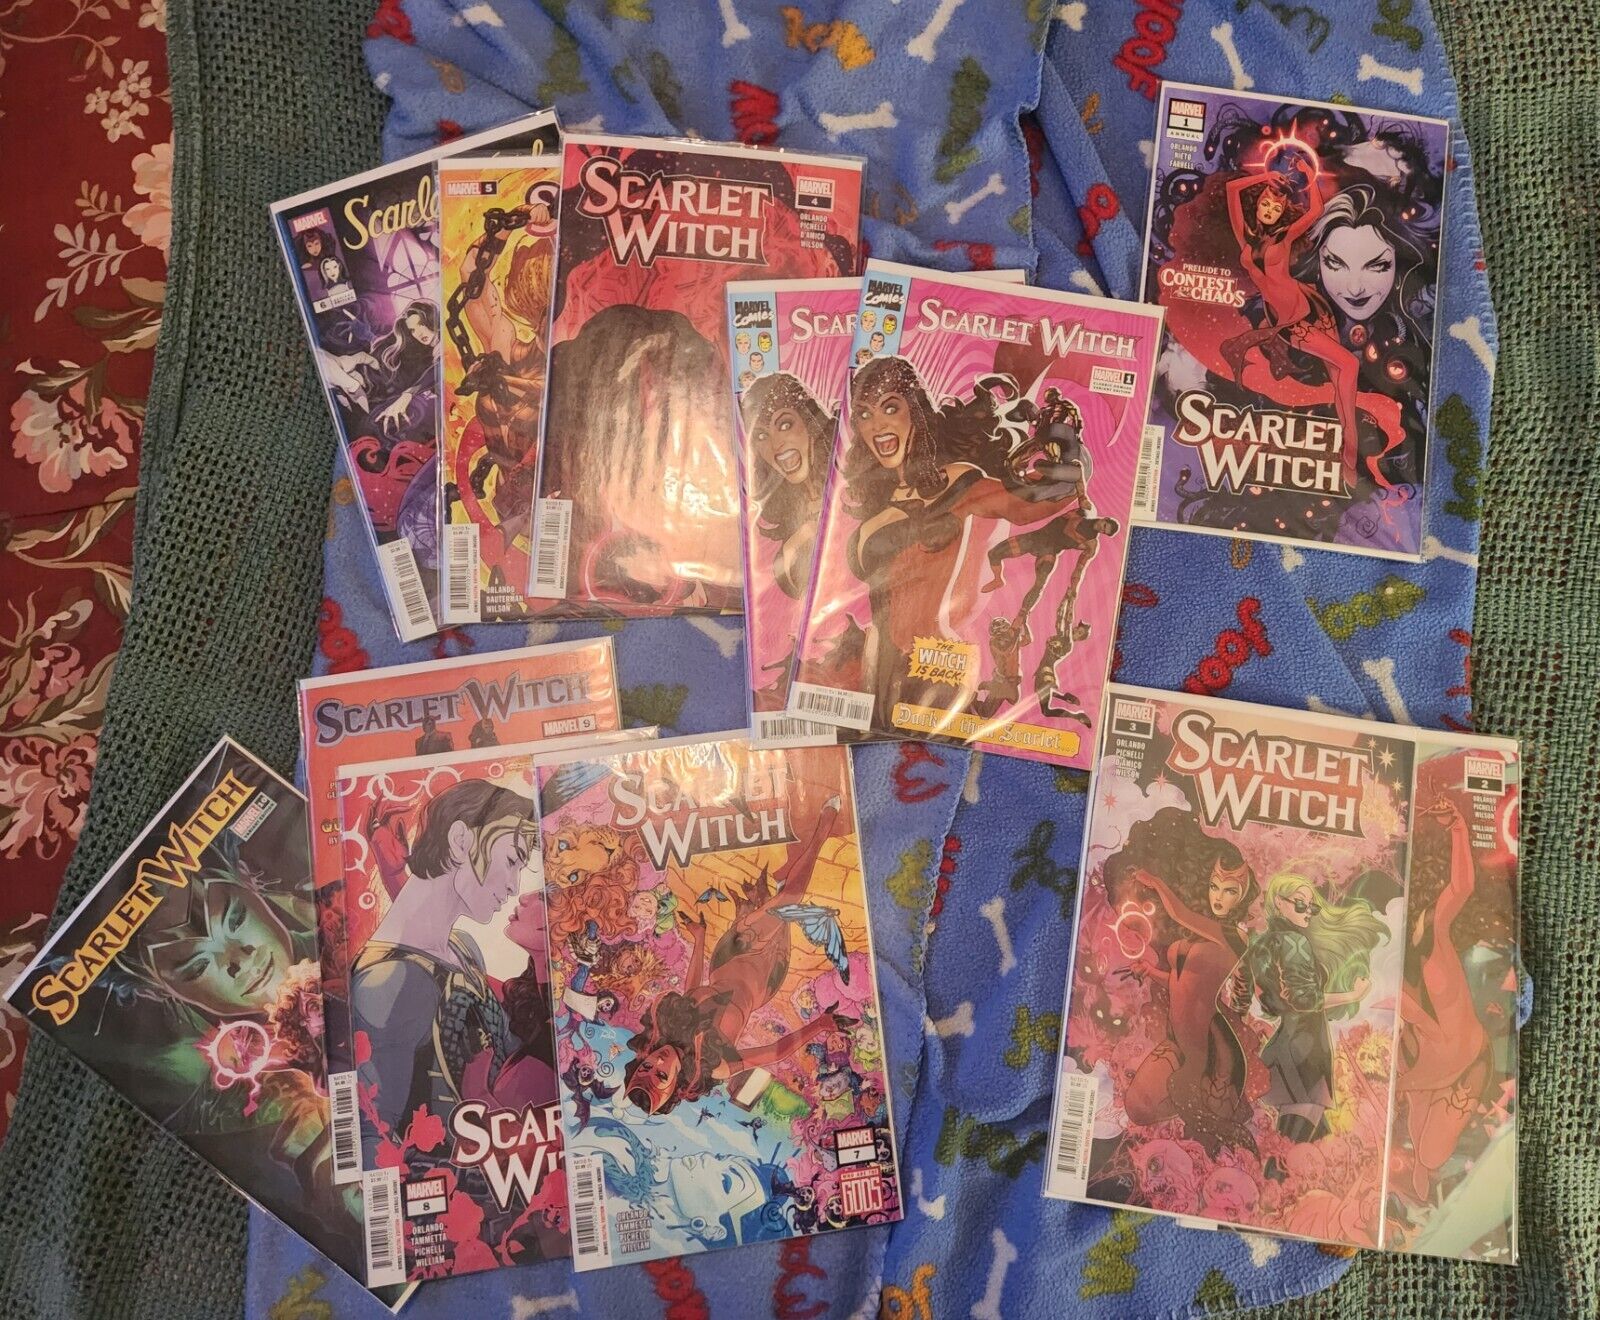 Scarlet Witch 1-10 complete & Annual 2023 - COMES WITH TWO #1 ISSUES Adam Hughes